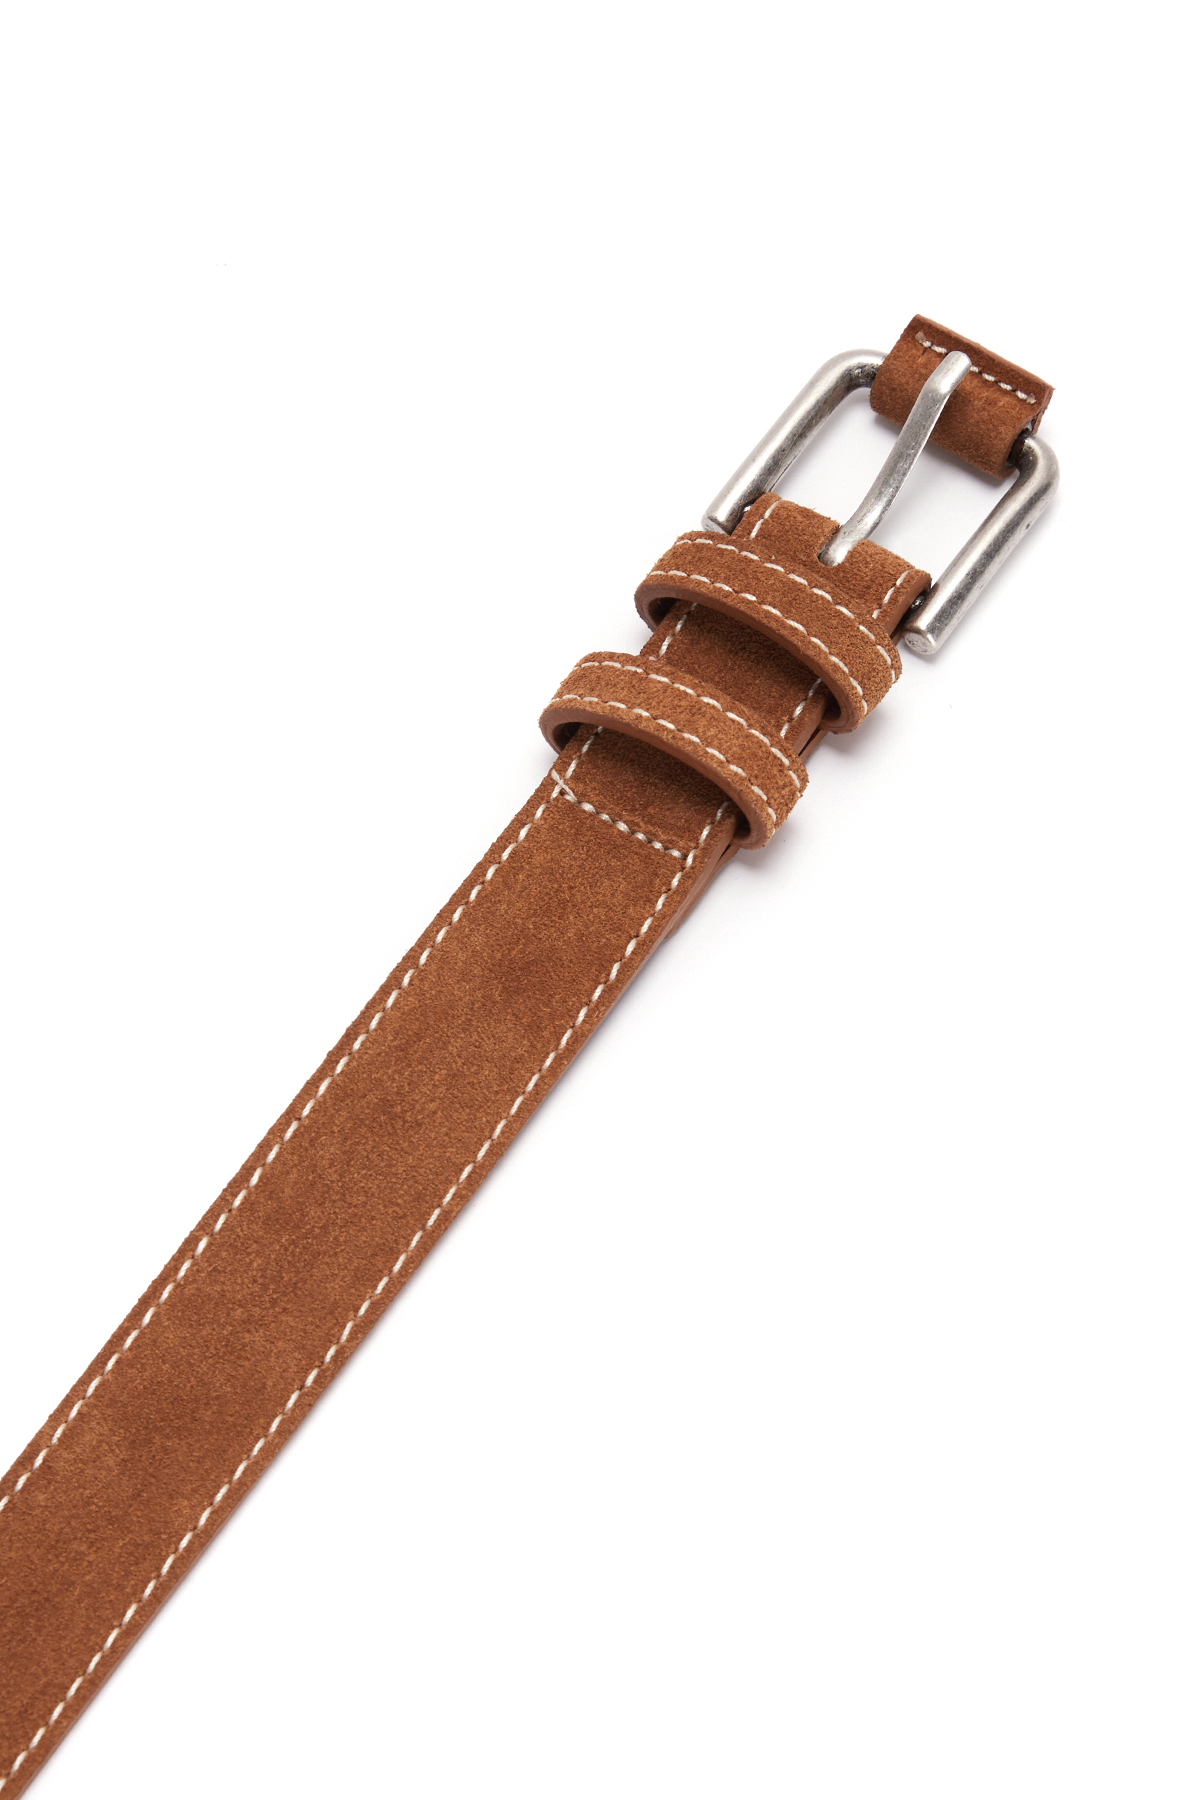 SUEDE LEATHER BELT IN CAMEL